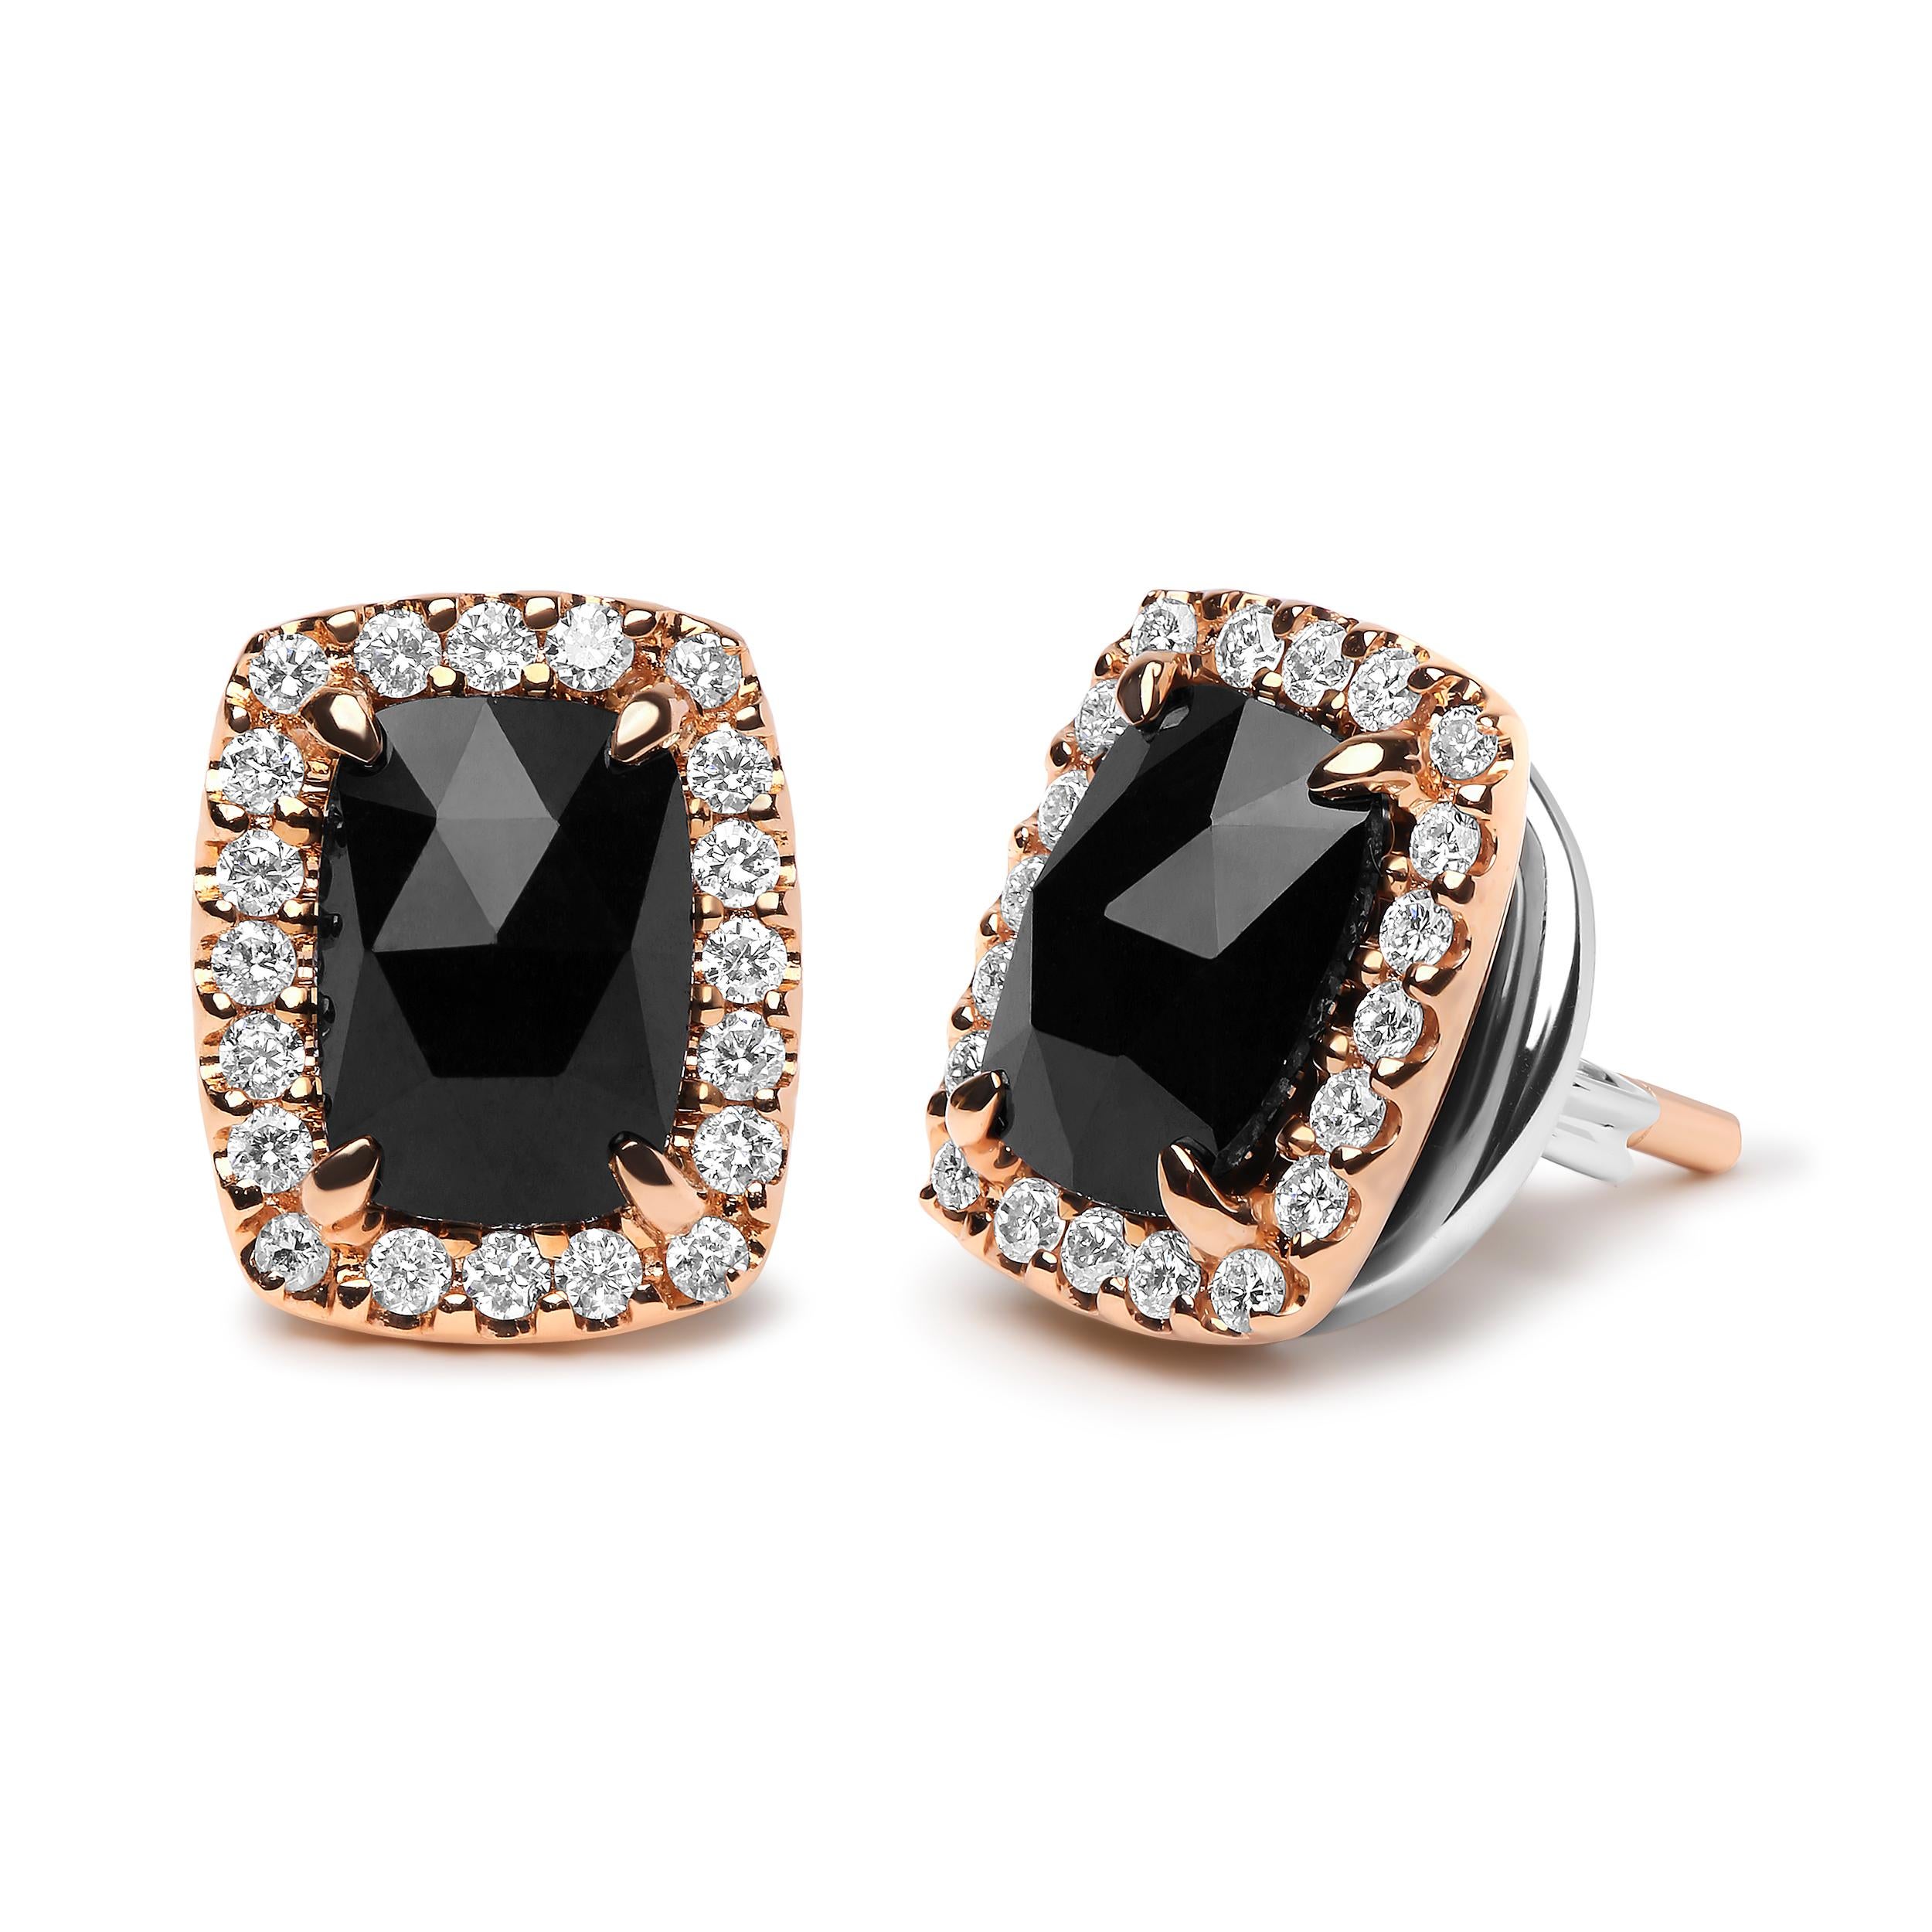 These classy studs are crafted of genuine 18k white and rose gold, a metal that will stay tarnish-free for years to come. A treasure of limitless style, this pair focuses on natural 8x6mm cushion-cut heat-treated black onyx gemstones, secured within